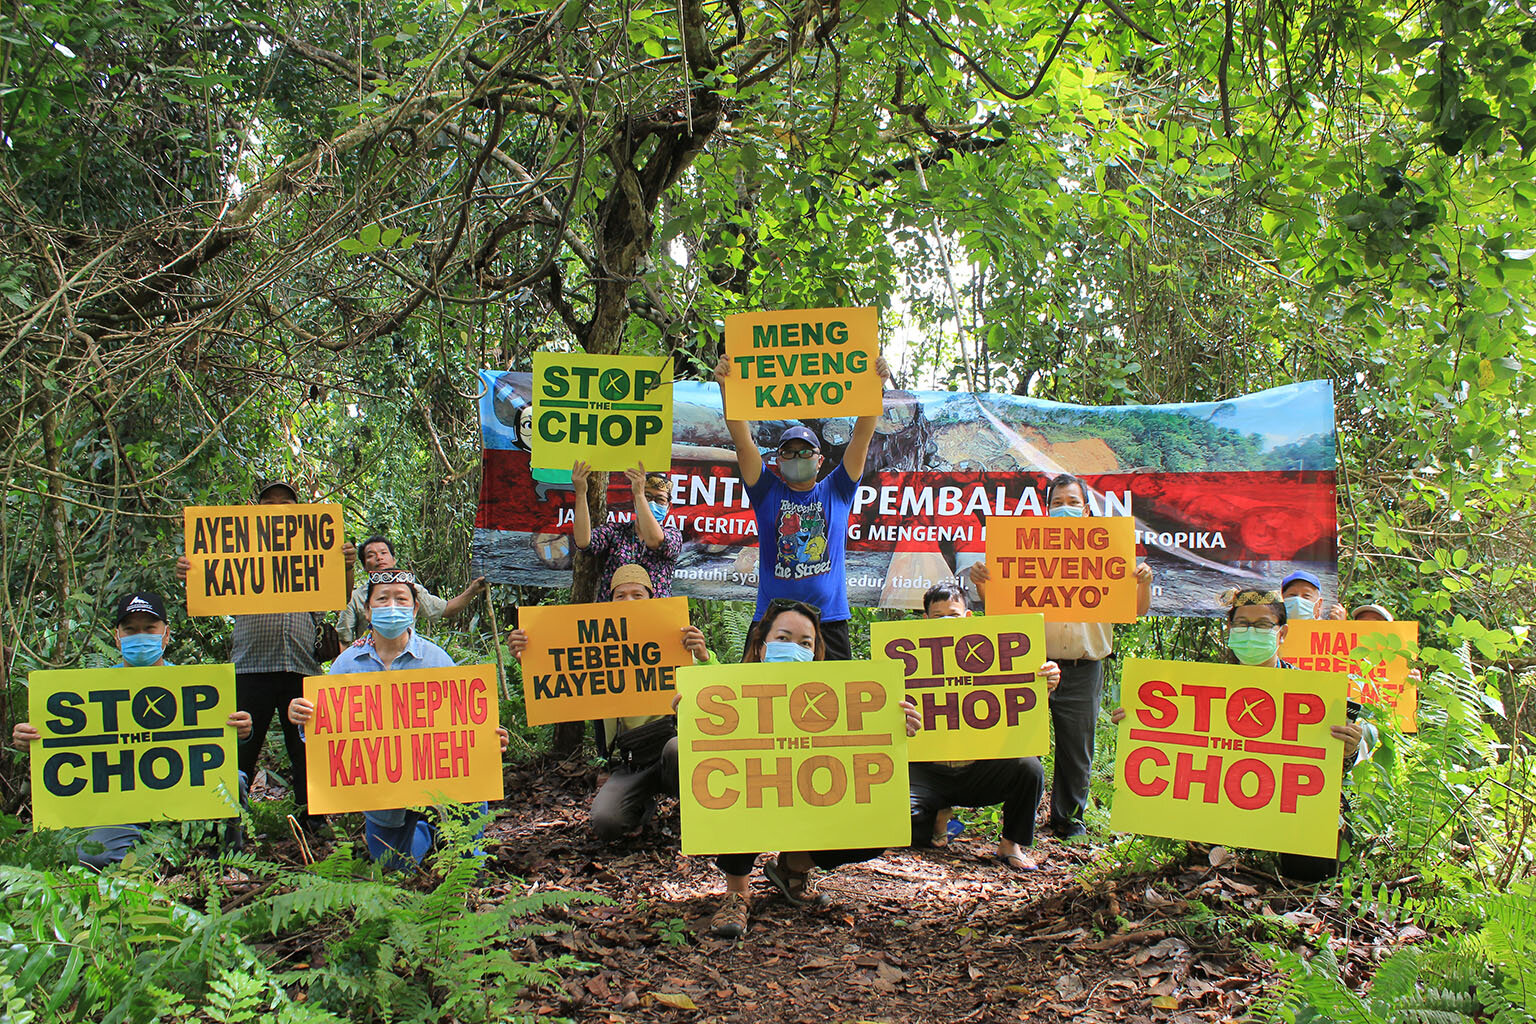 The “Stop the Chop Protest” in Miri, Sarawak against Malaysian forestry company Samling in October 2020. Photo credit: The Borneo Project